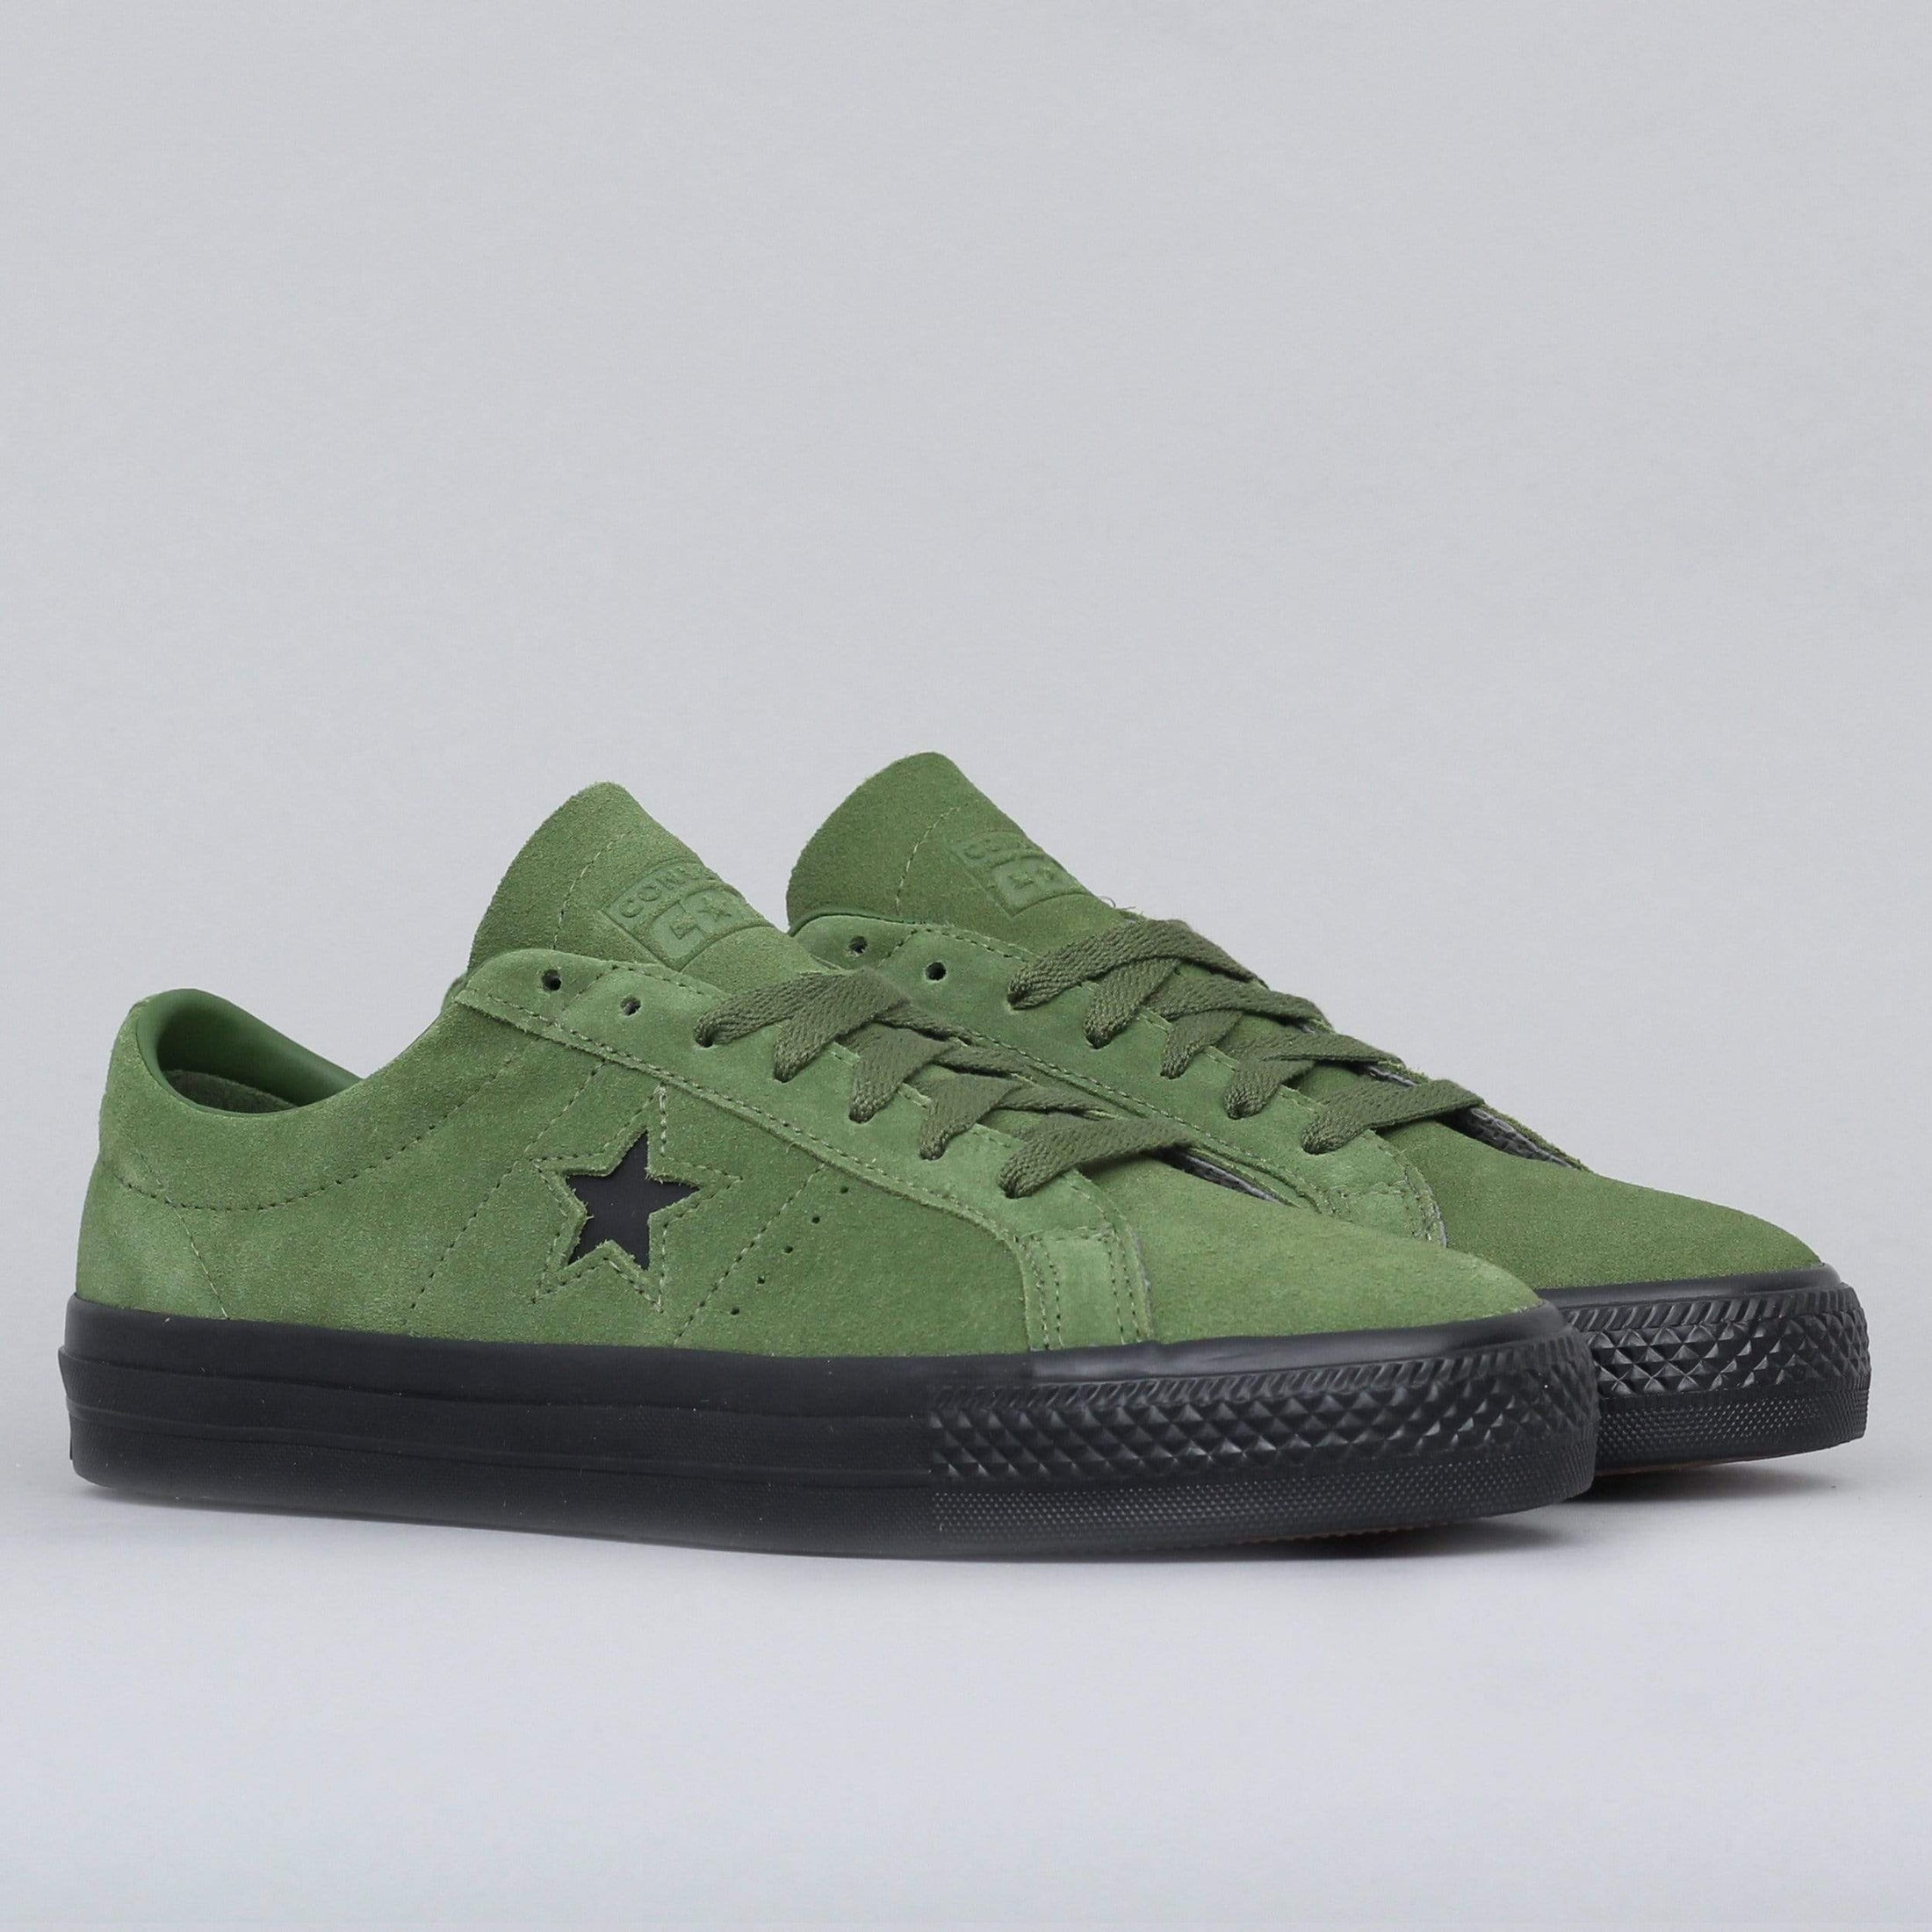 Converse One Star Pro OX Suede Shoes Cypress Green / Black / Black